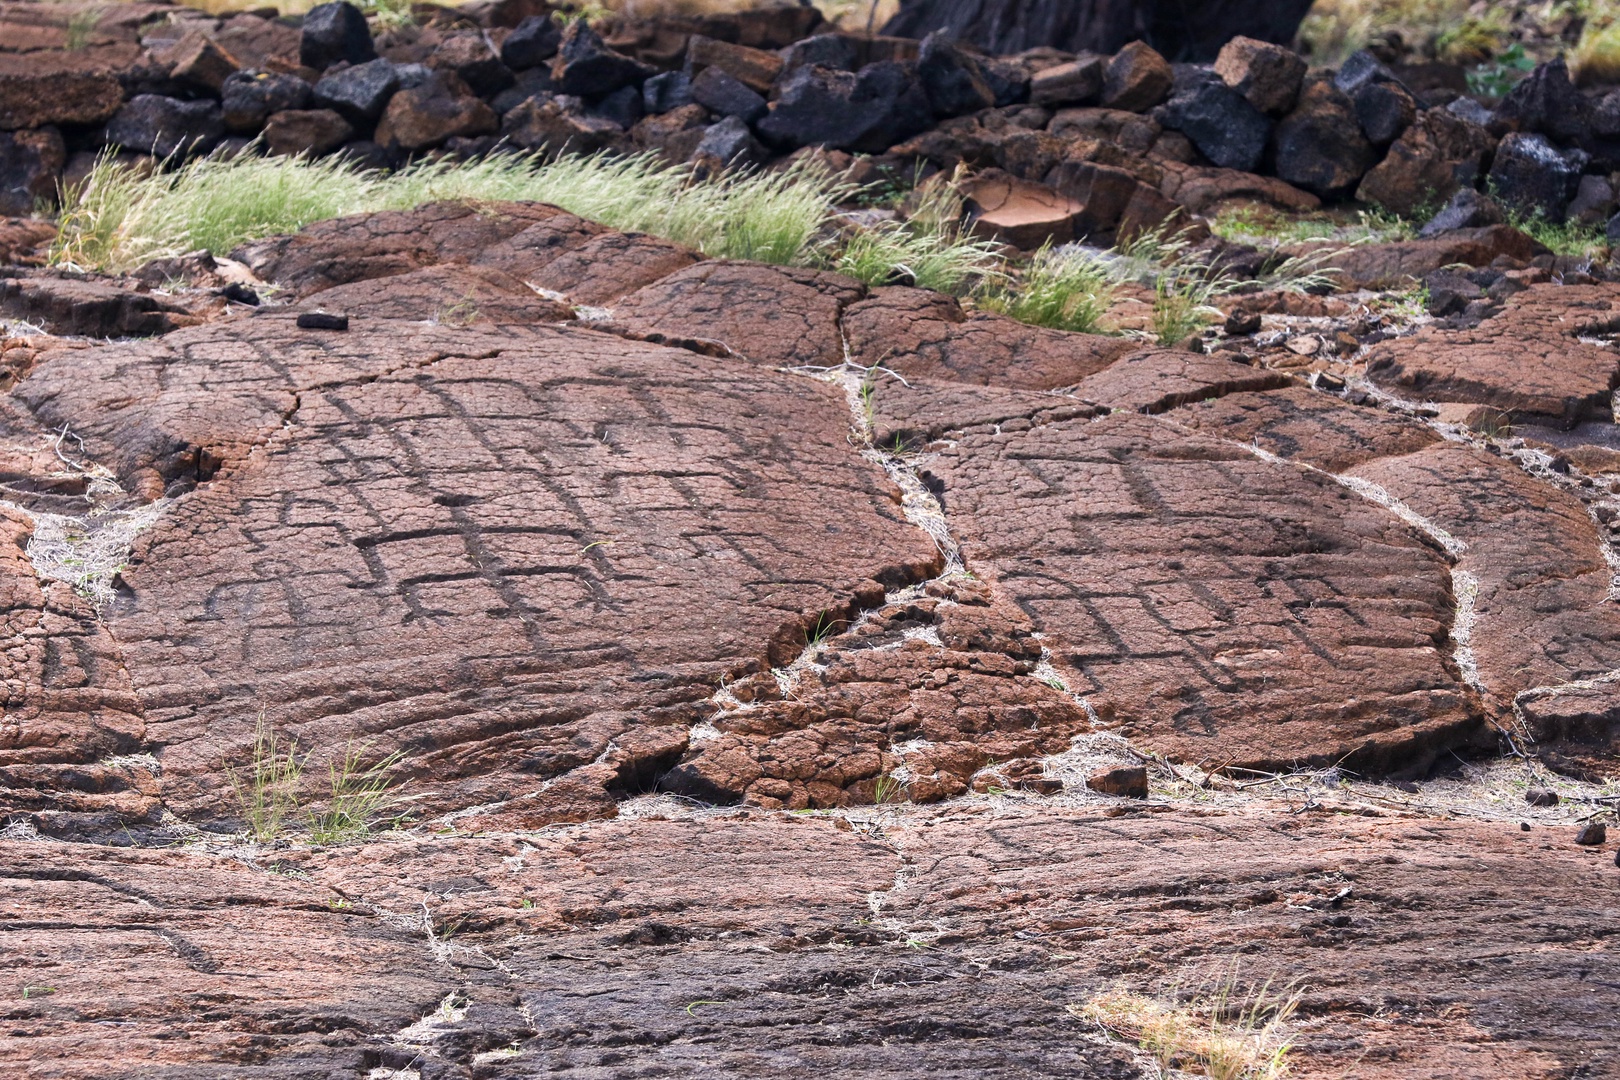 Kamuela Vacation Rentals, Palm Villas E1 - Fascinating & Ancient Petroglyphs on Nearby Trails